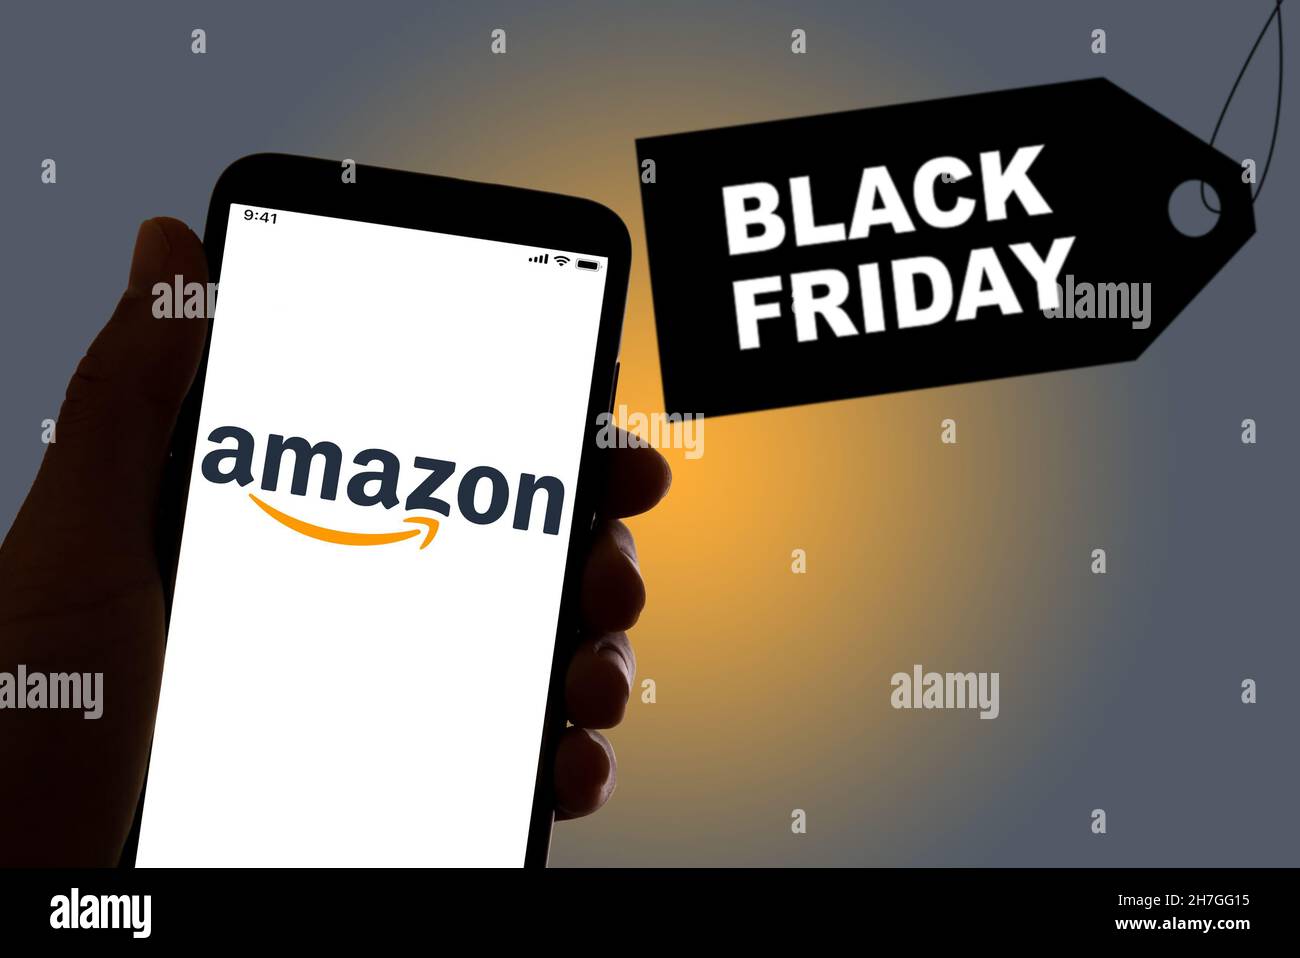 The Amazon shopping app logo is seen on the display of a smarthphone with a  "Black Friday" sign in the background in Barcelona, Spain on November 19  Stock Photo - Alamy